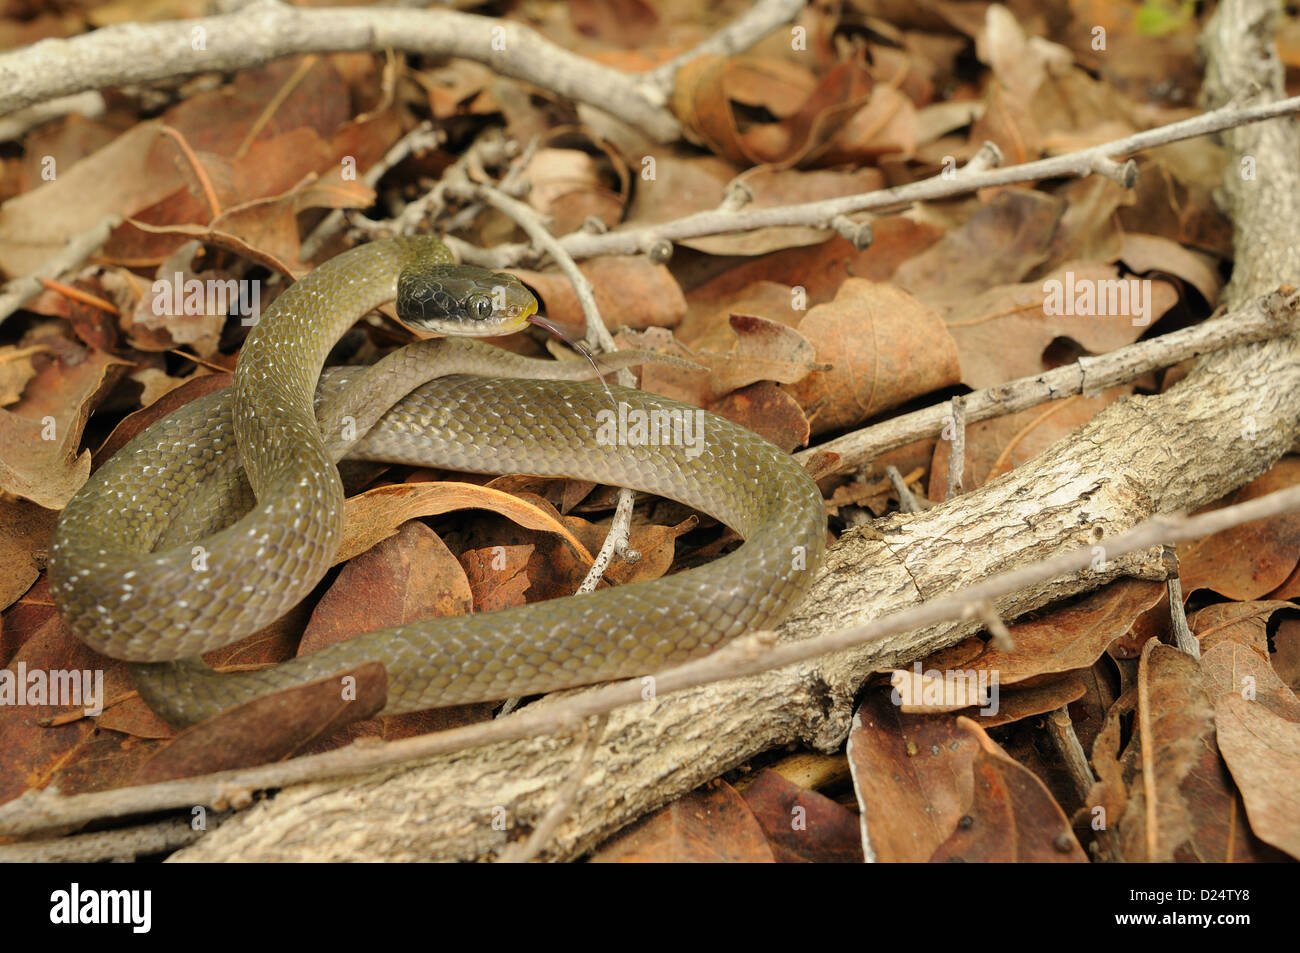 White-lipped Herald Snake Crotaphopeltis hotamboeia adult flicking forked tongue coiled on leaf litter Ruaha N.P Tanzania Stock Photo